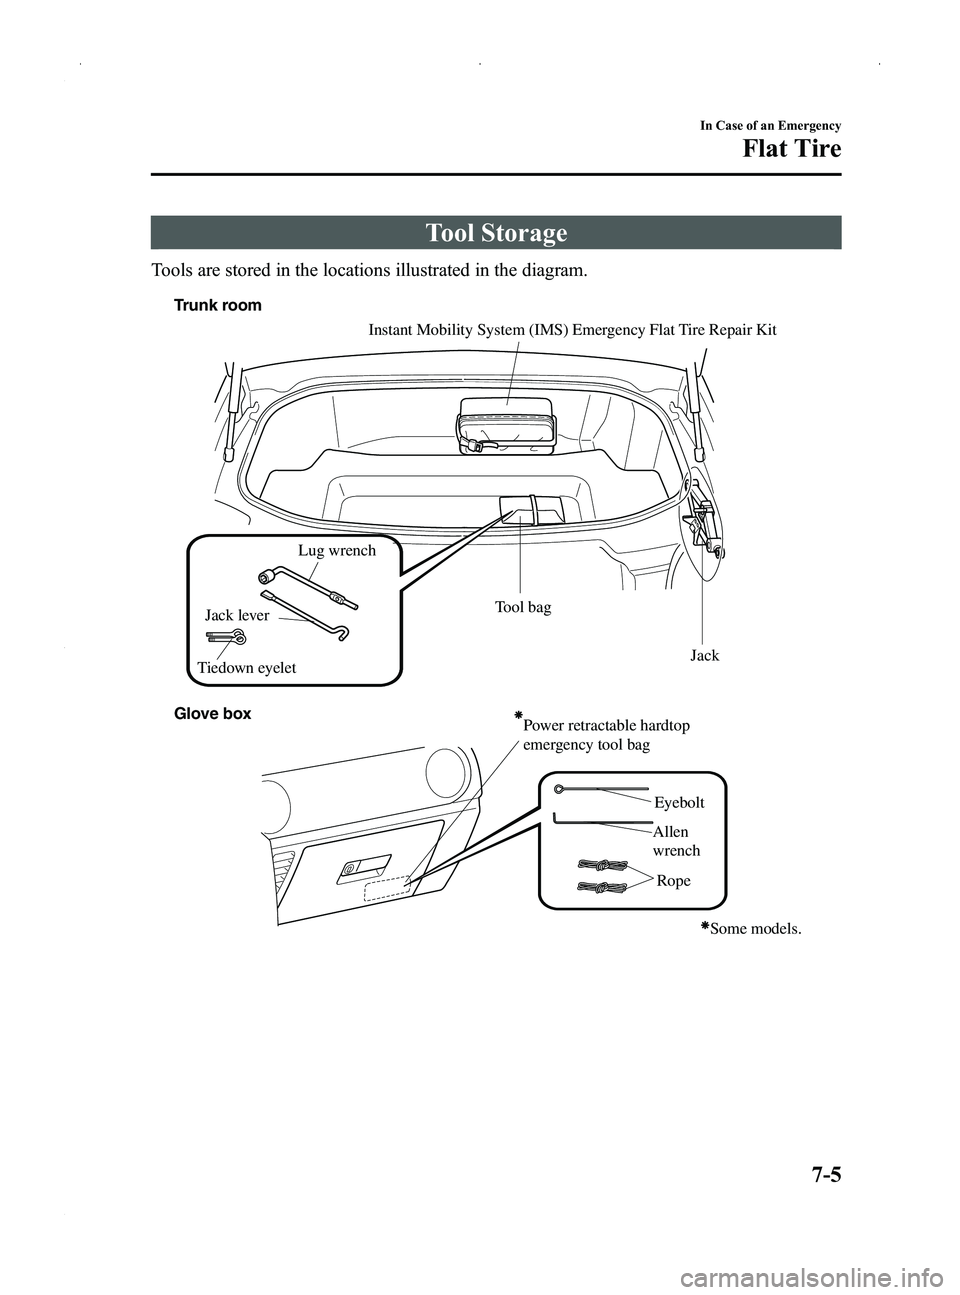 MAZDA MODEL MX-5 MIATA PRHT 2014  Owners Manual Black plate (305,1)
Tool Storage
Tools are stored in the locations illustrated in the diagram.
Power retractable hardtop 
emergency tool bag
Tool bagGlove box Lug wrench
Jack
Jack lever
Instant Mobili